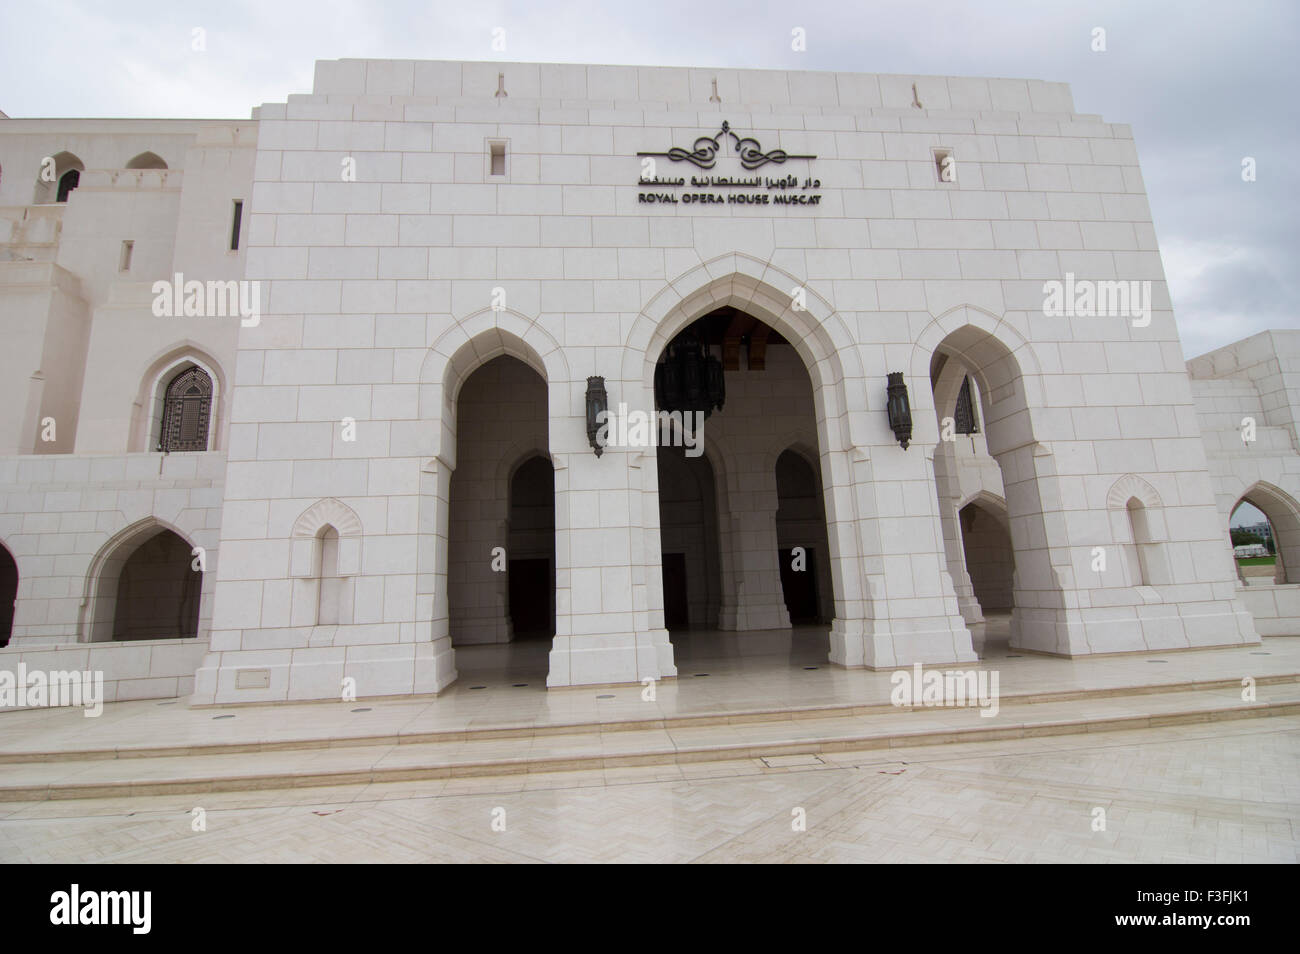 White stone exterior of the Royal Opera House in Shati Al-Qurm, Muscat